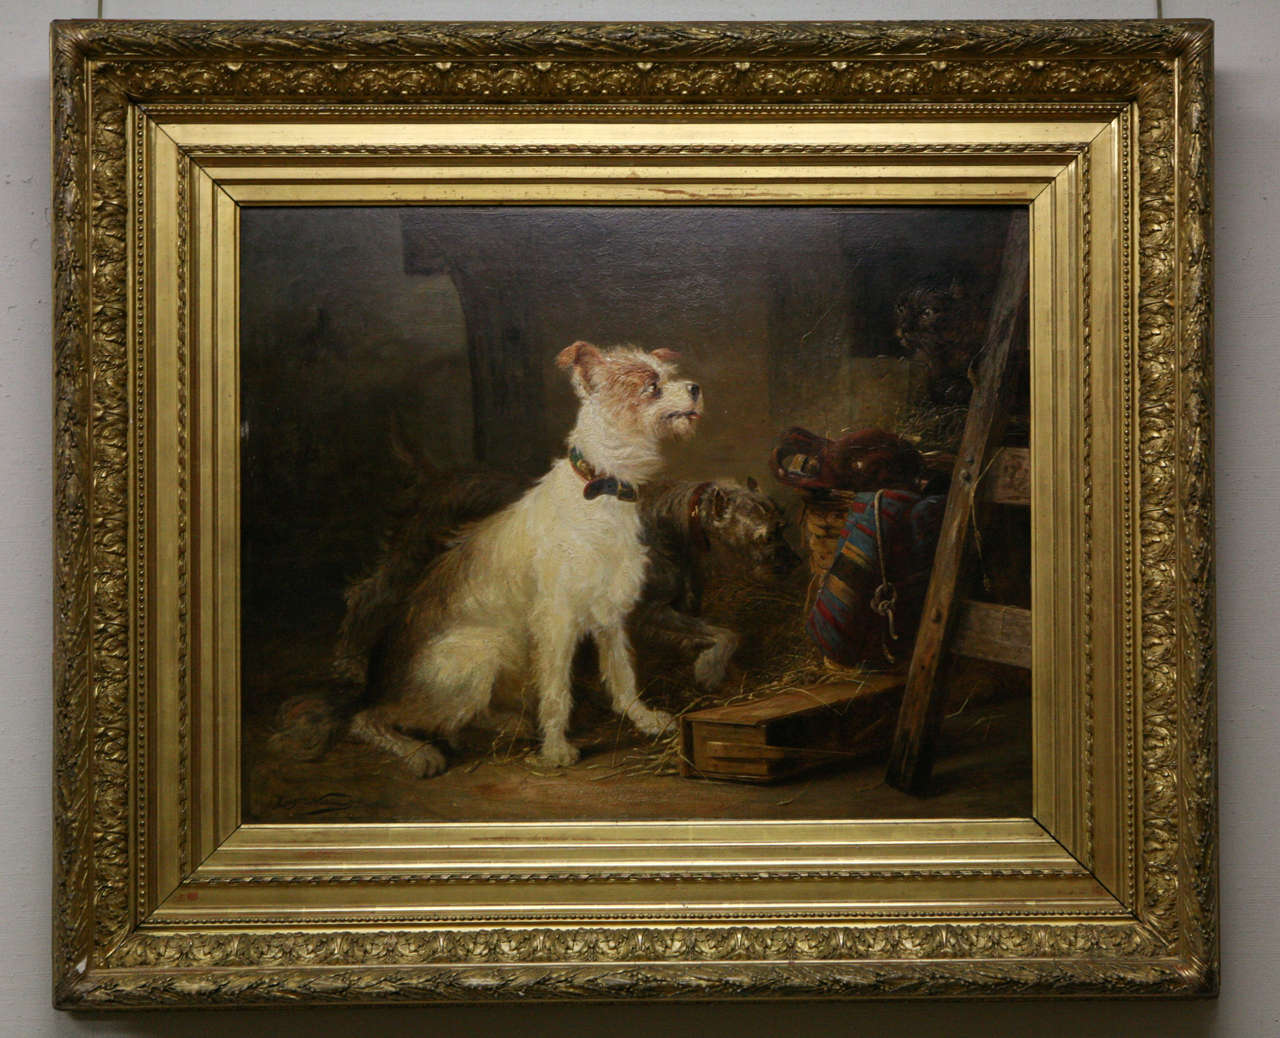 This painting is an oil on board painted by Zacharias Noterman, (1820-1890) a Benezit listed artist and is signed lower left. The gilded frame is original.